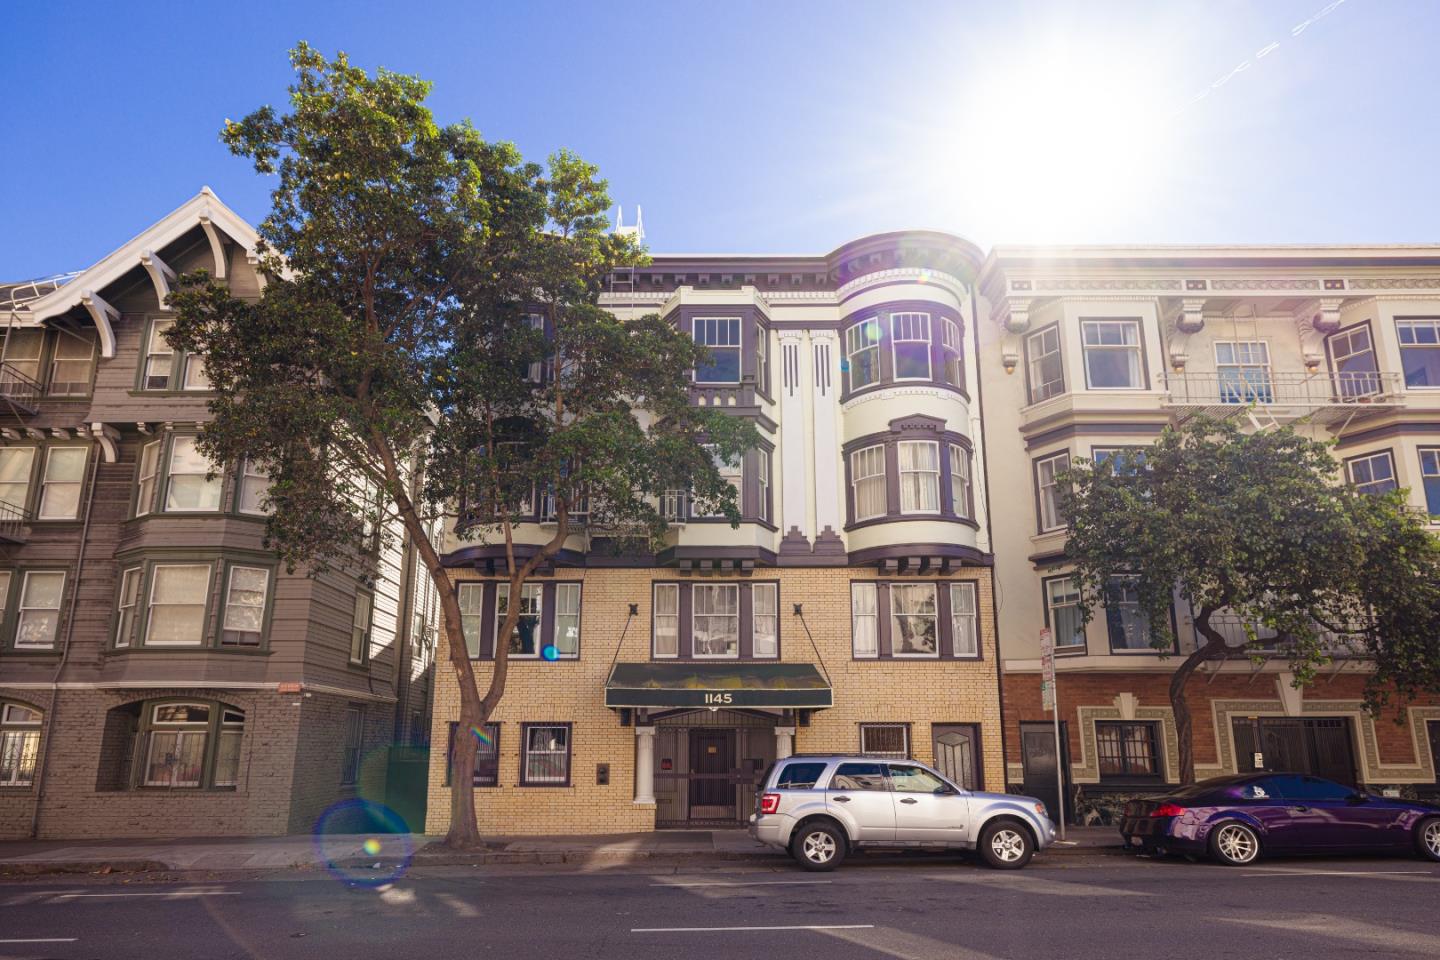 Photo of 1145 Pine St #44 in San Francisco, CA